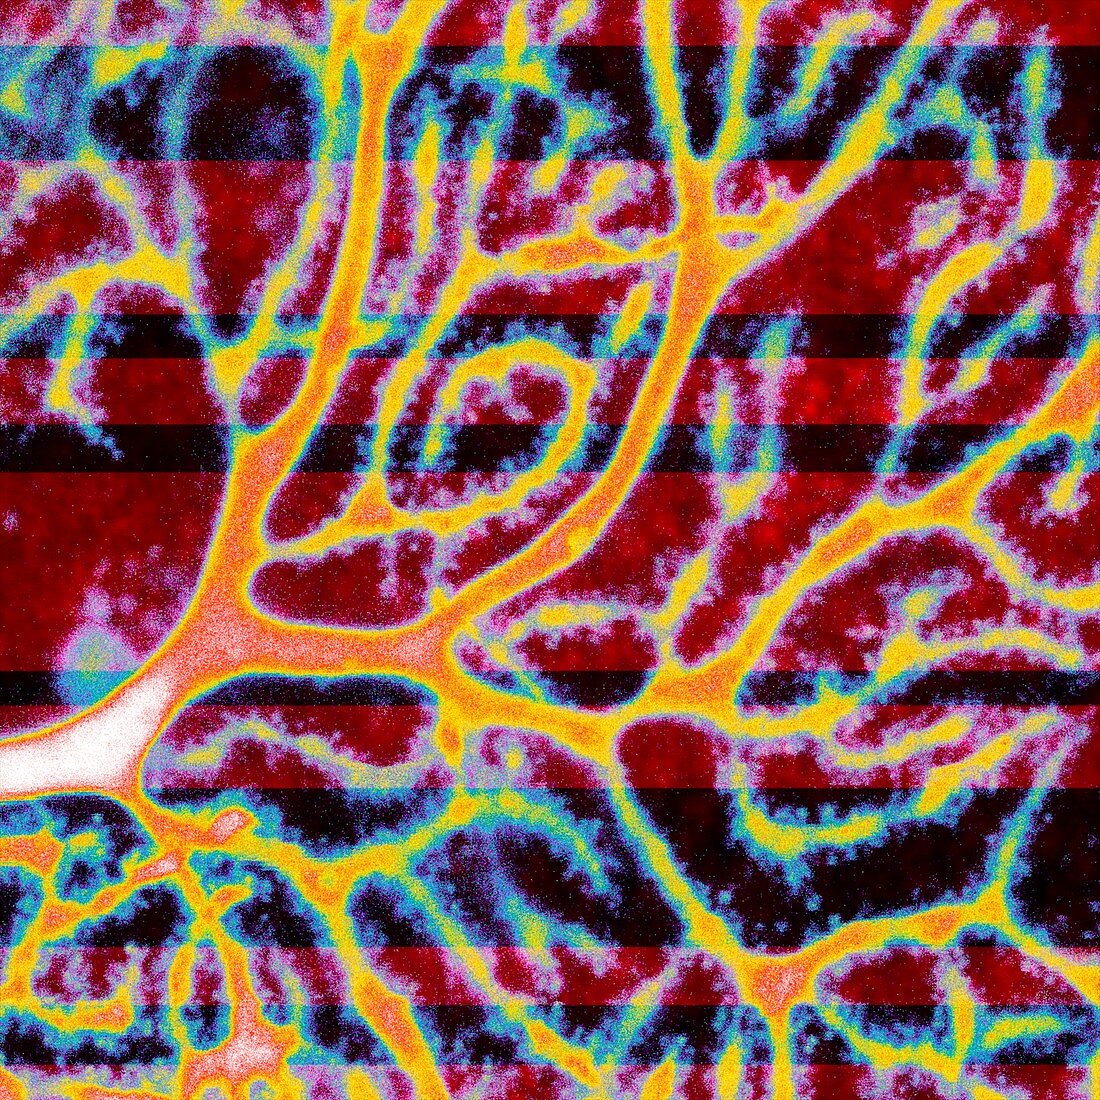 Purkinje nerve cell dendrites, confocal micrograph